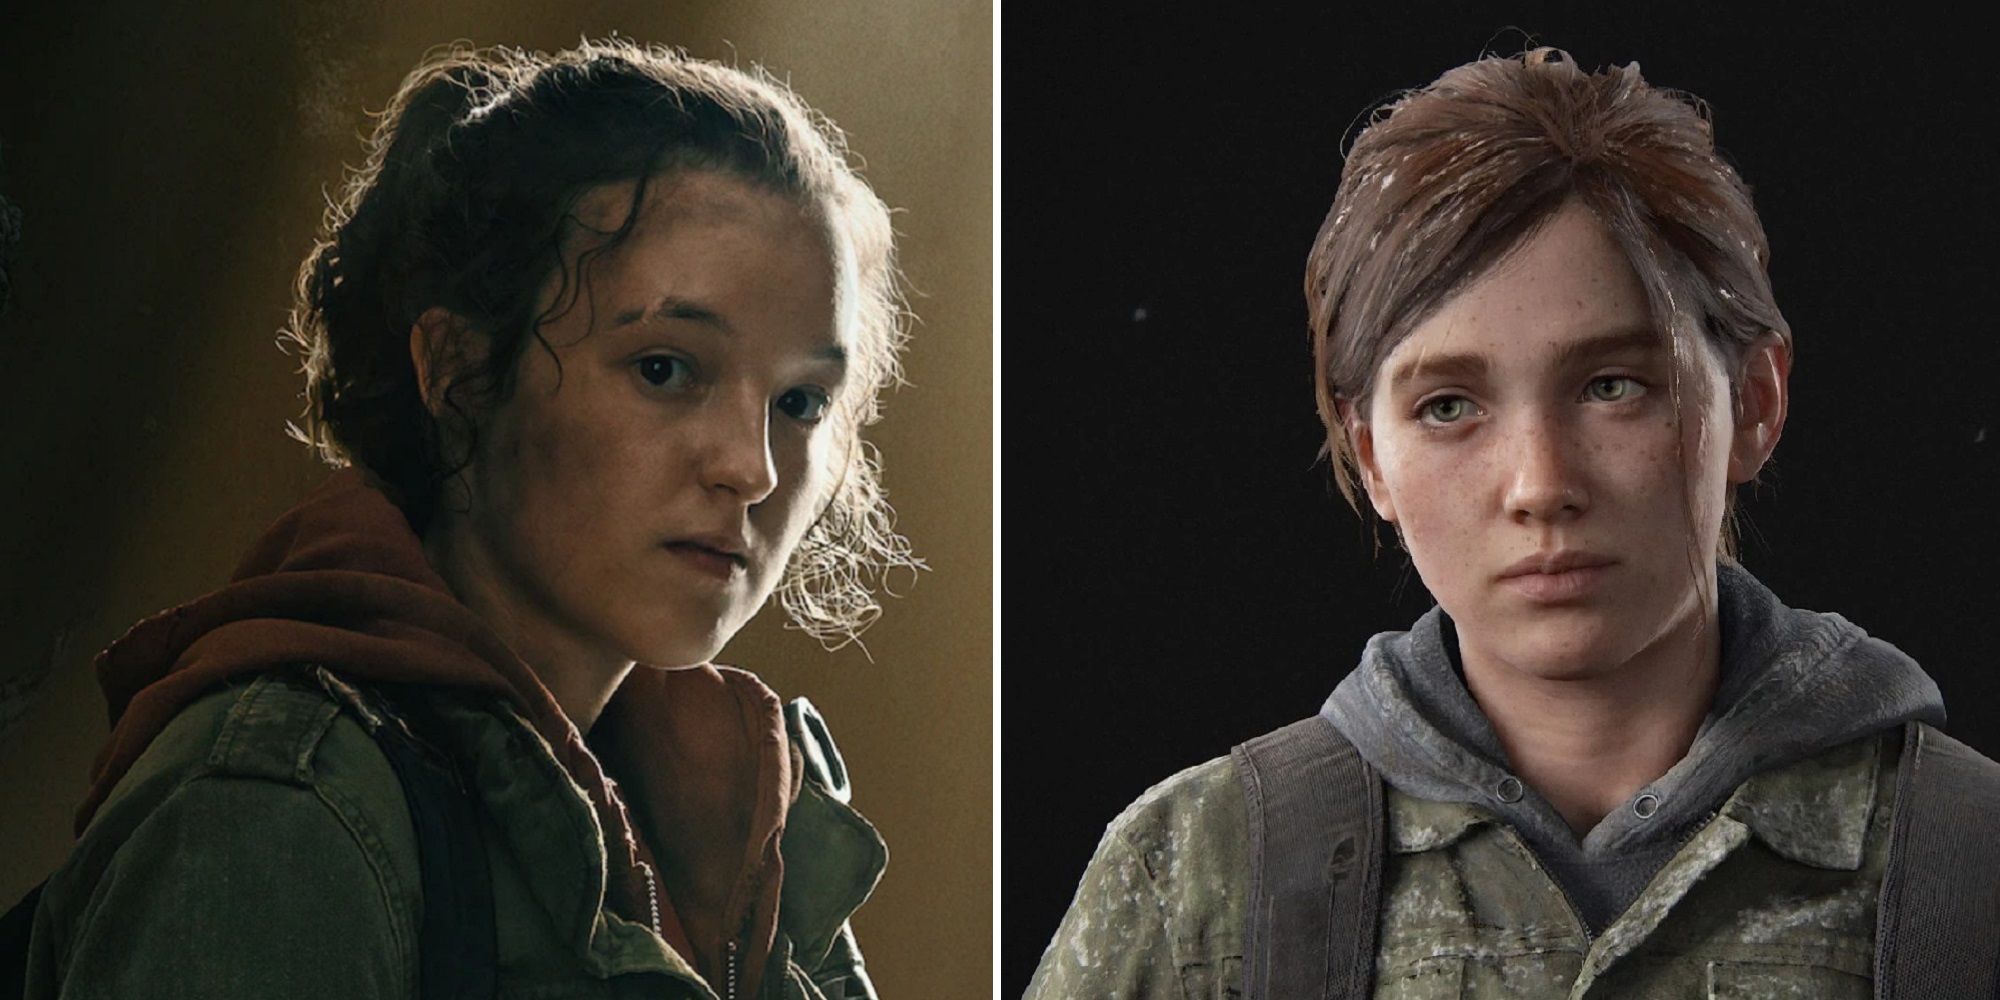 The Last of Us' is getting a second season on HBO